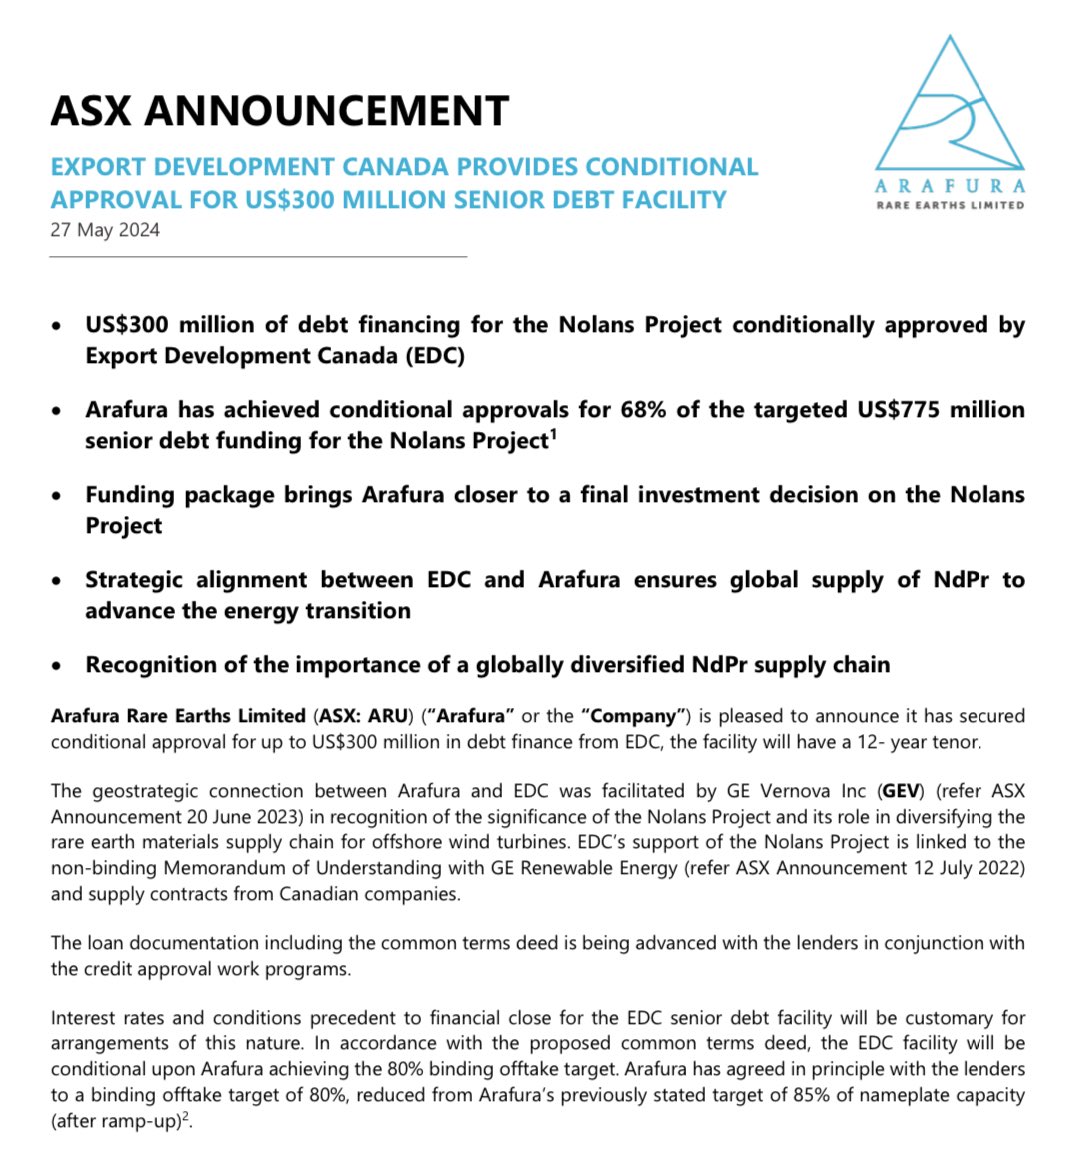 $BUS neighbour $ARU receives conditional approval for another $300 mil debt facility Now 70% of the way funded to building Australia’s next #RareEarth mine $ARU valued at $450 million $BUS valued at $5 million $BUS to begin drilling their target in the coming weeks 👍